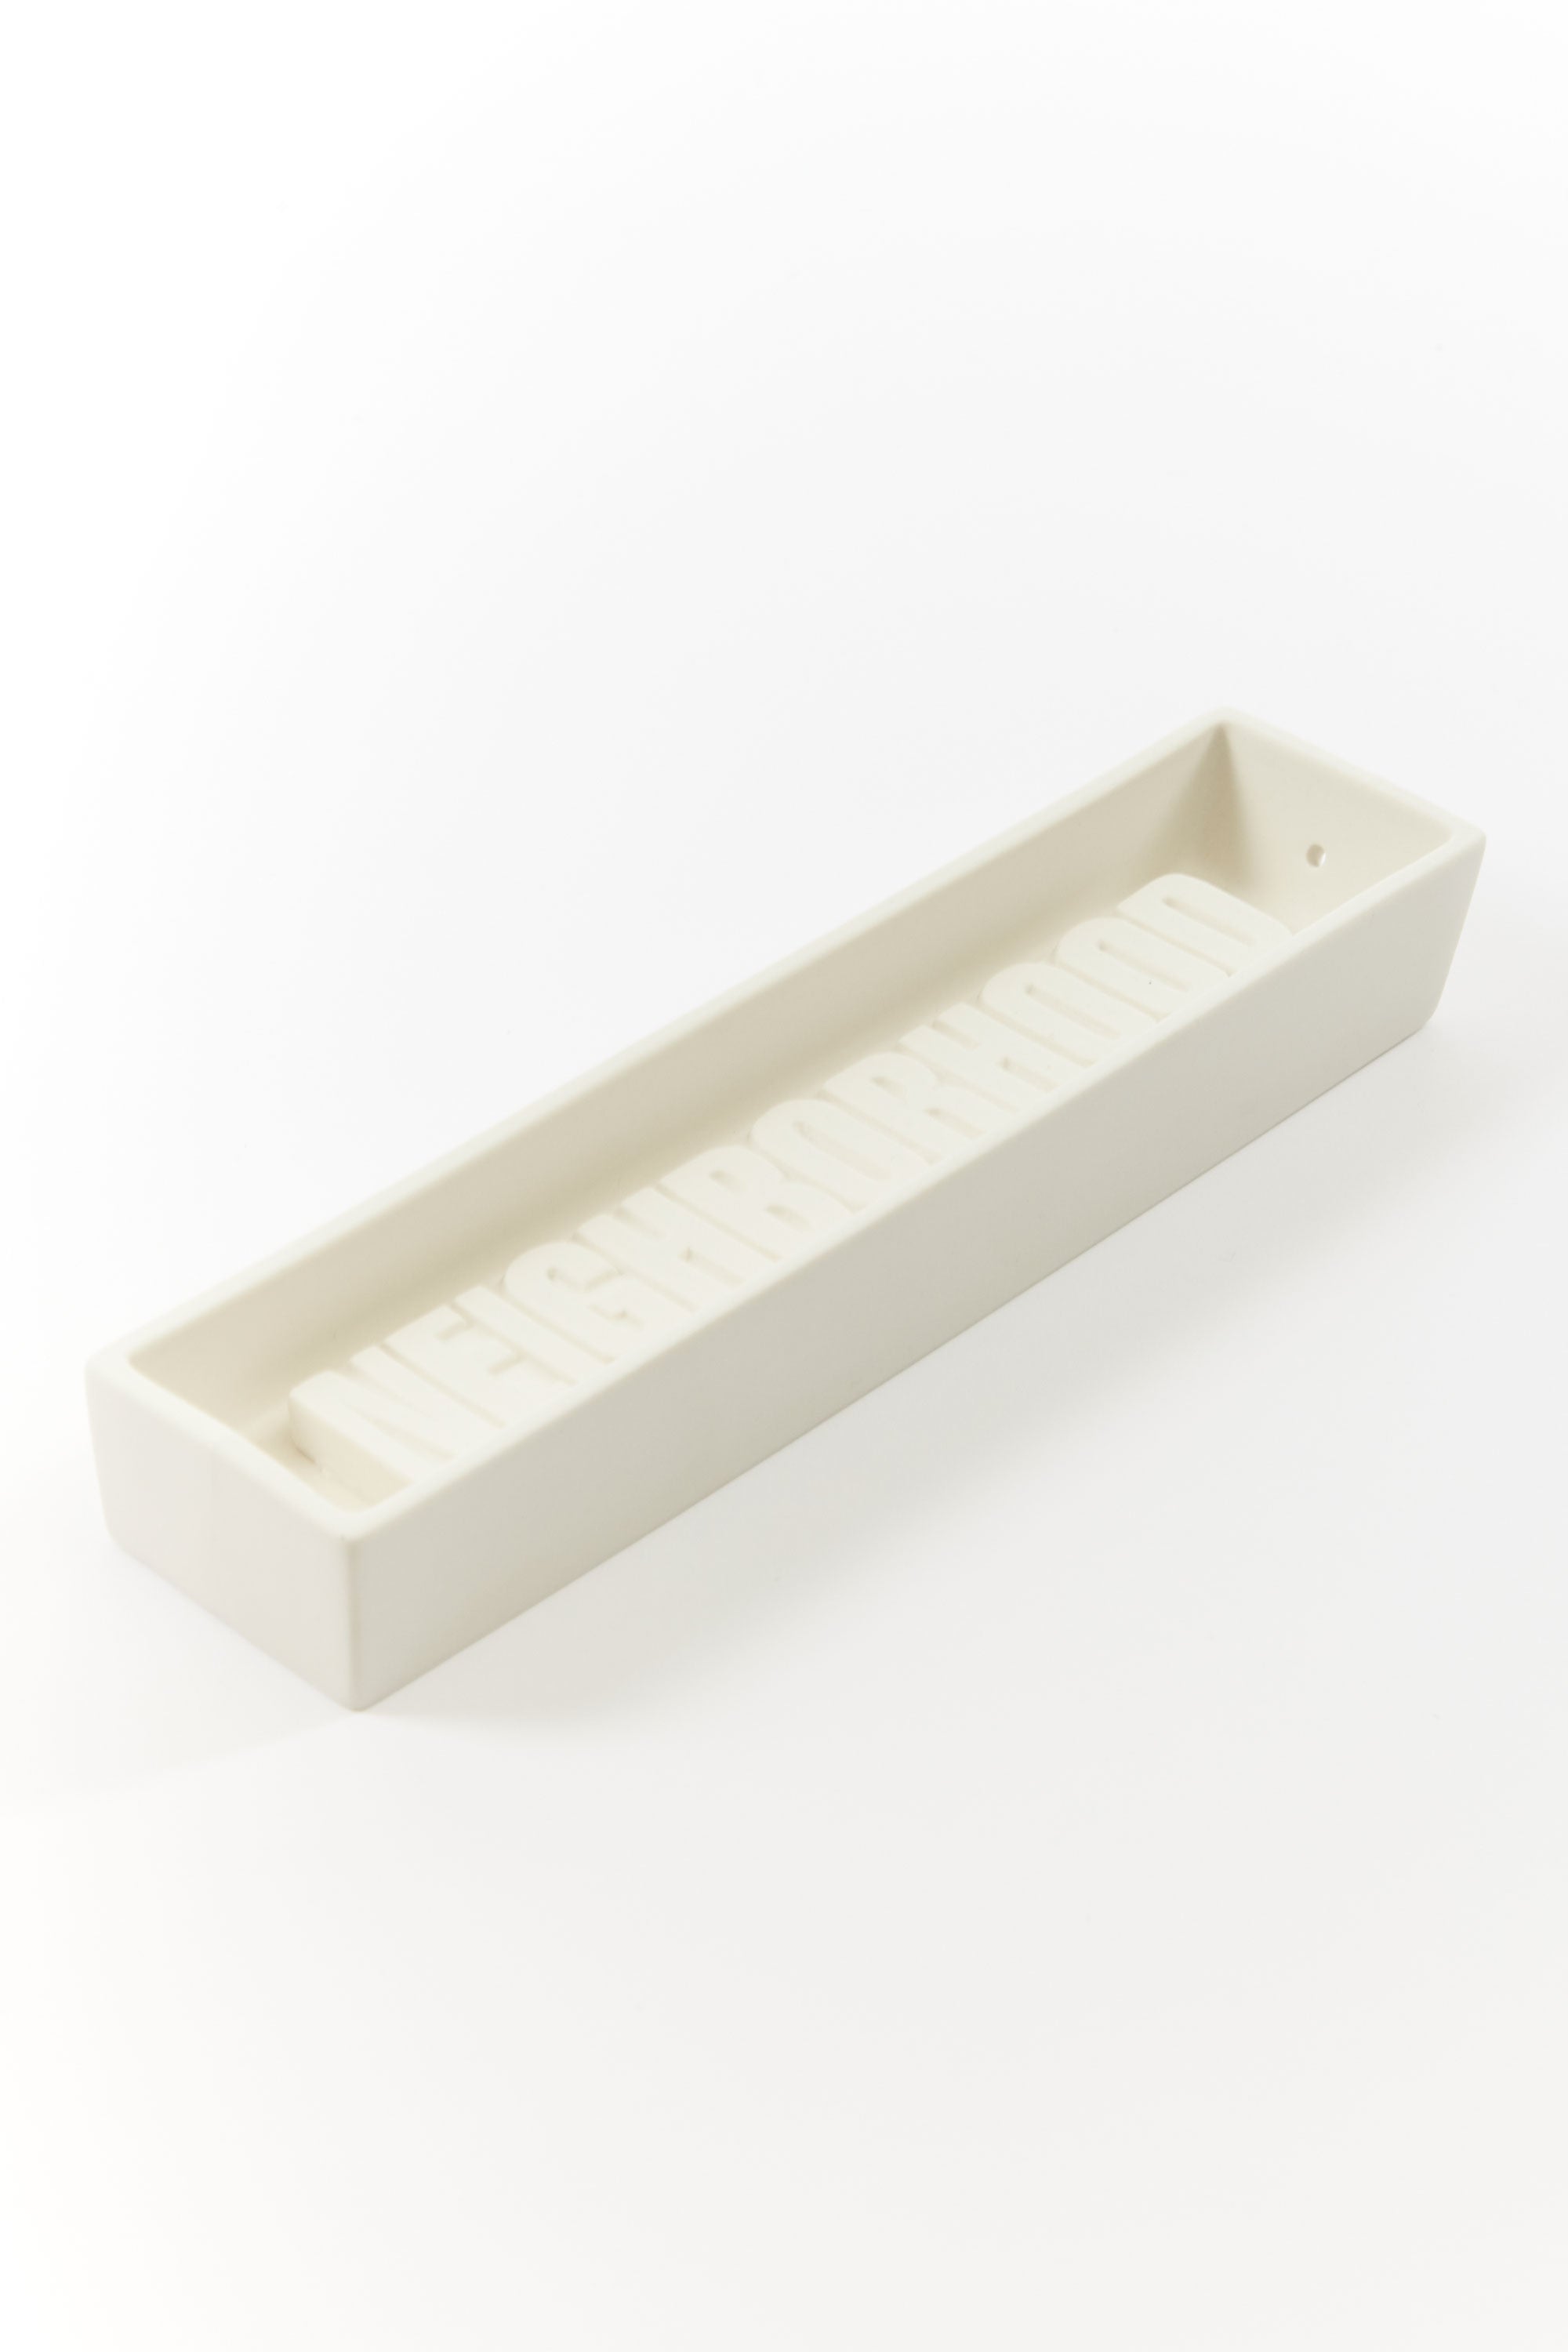 The NEIGHBORHOOD - NEIGHBORHOOD CERAMIC INCENSE TRAY WHITE available online with global shipping, and in PAM Stores Melbourne and Sydney.